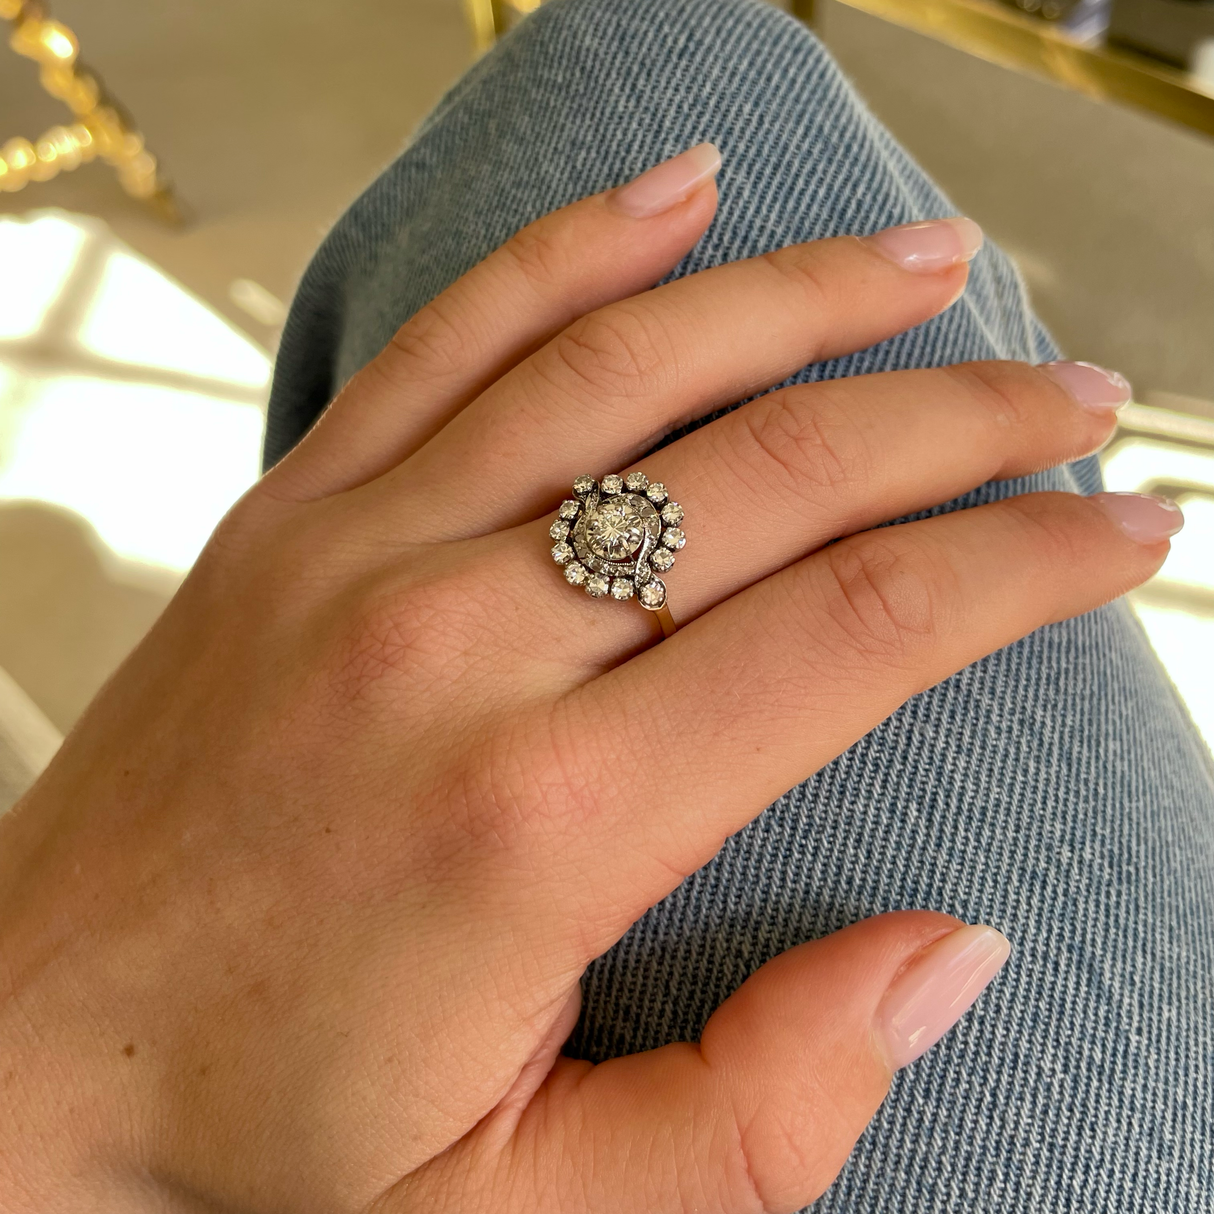 Antique French diamond cluster engagement ring, worn on hand.